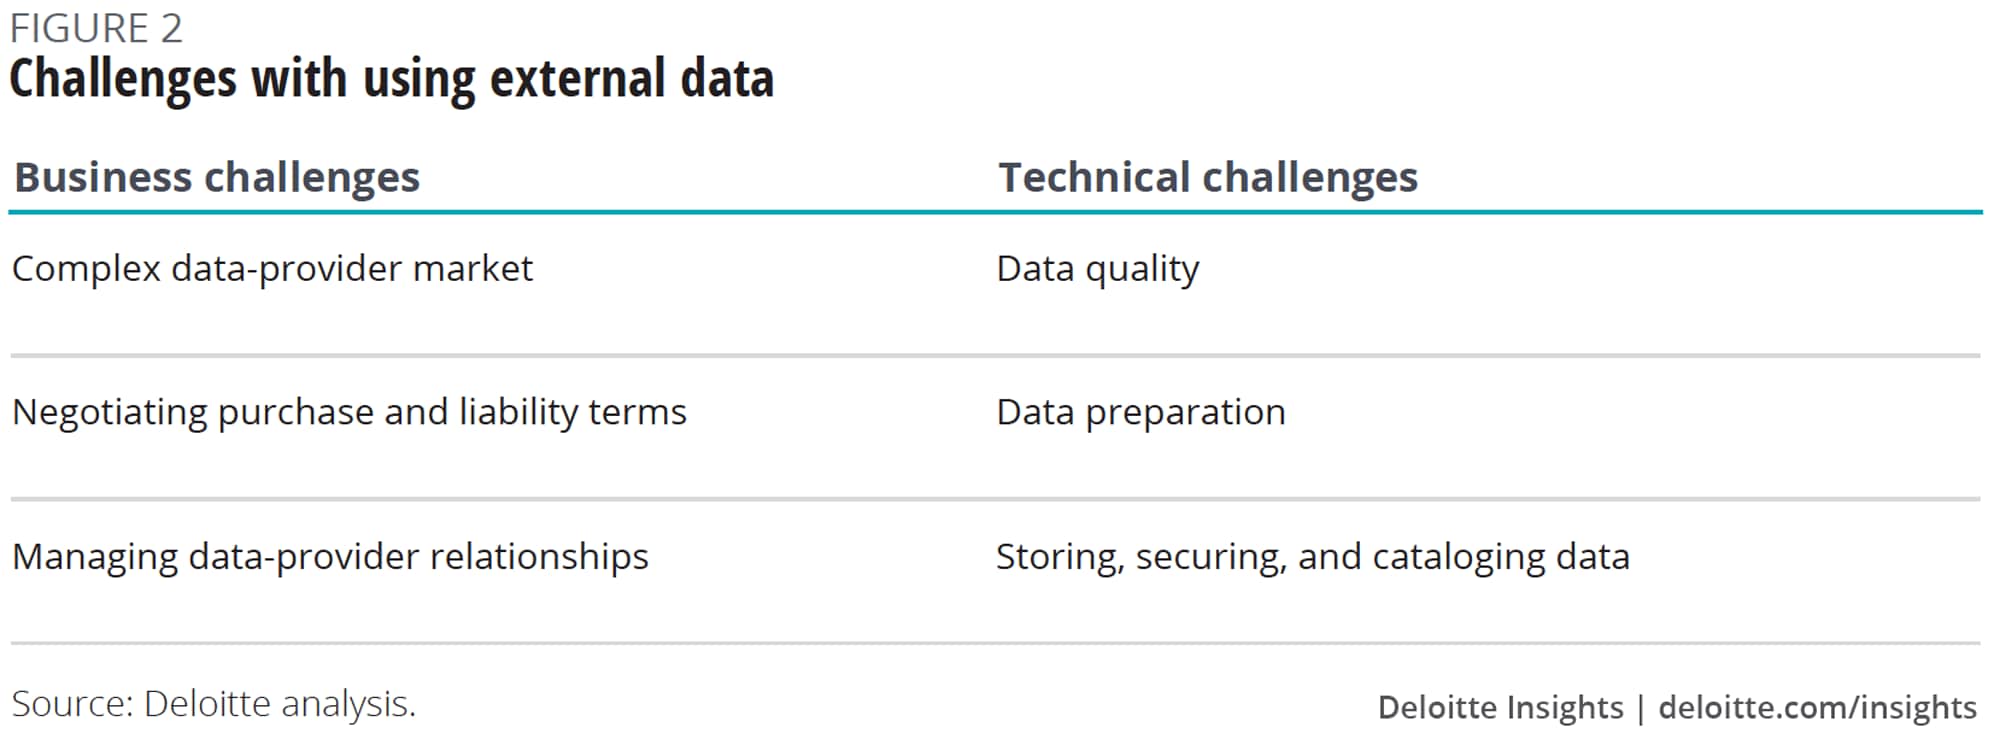 Challenges with using external data